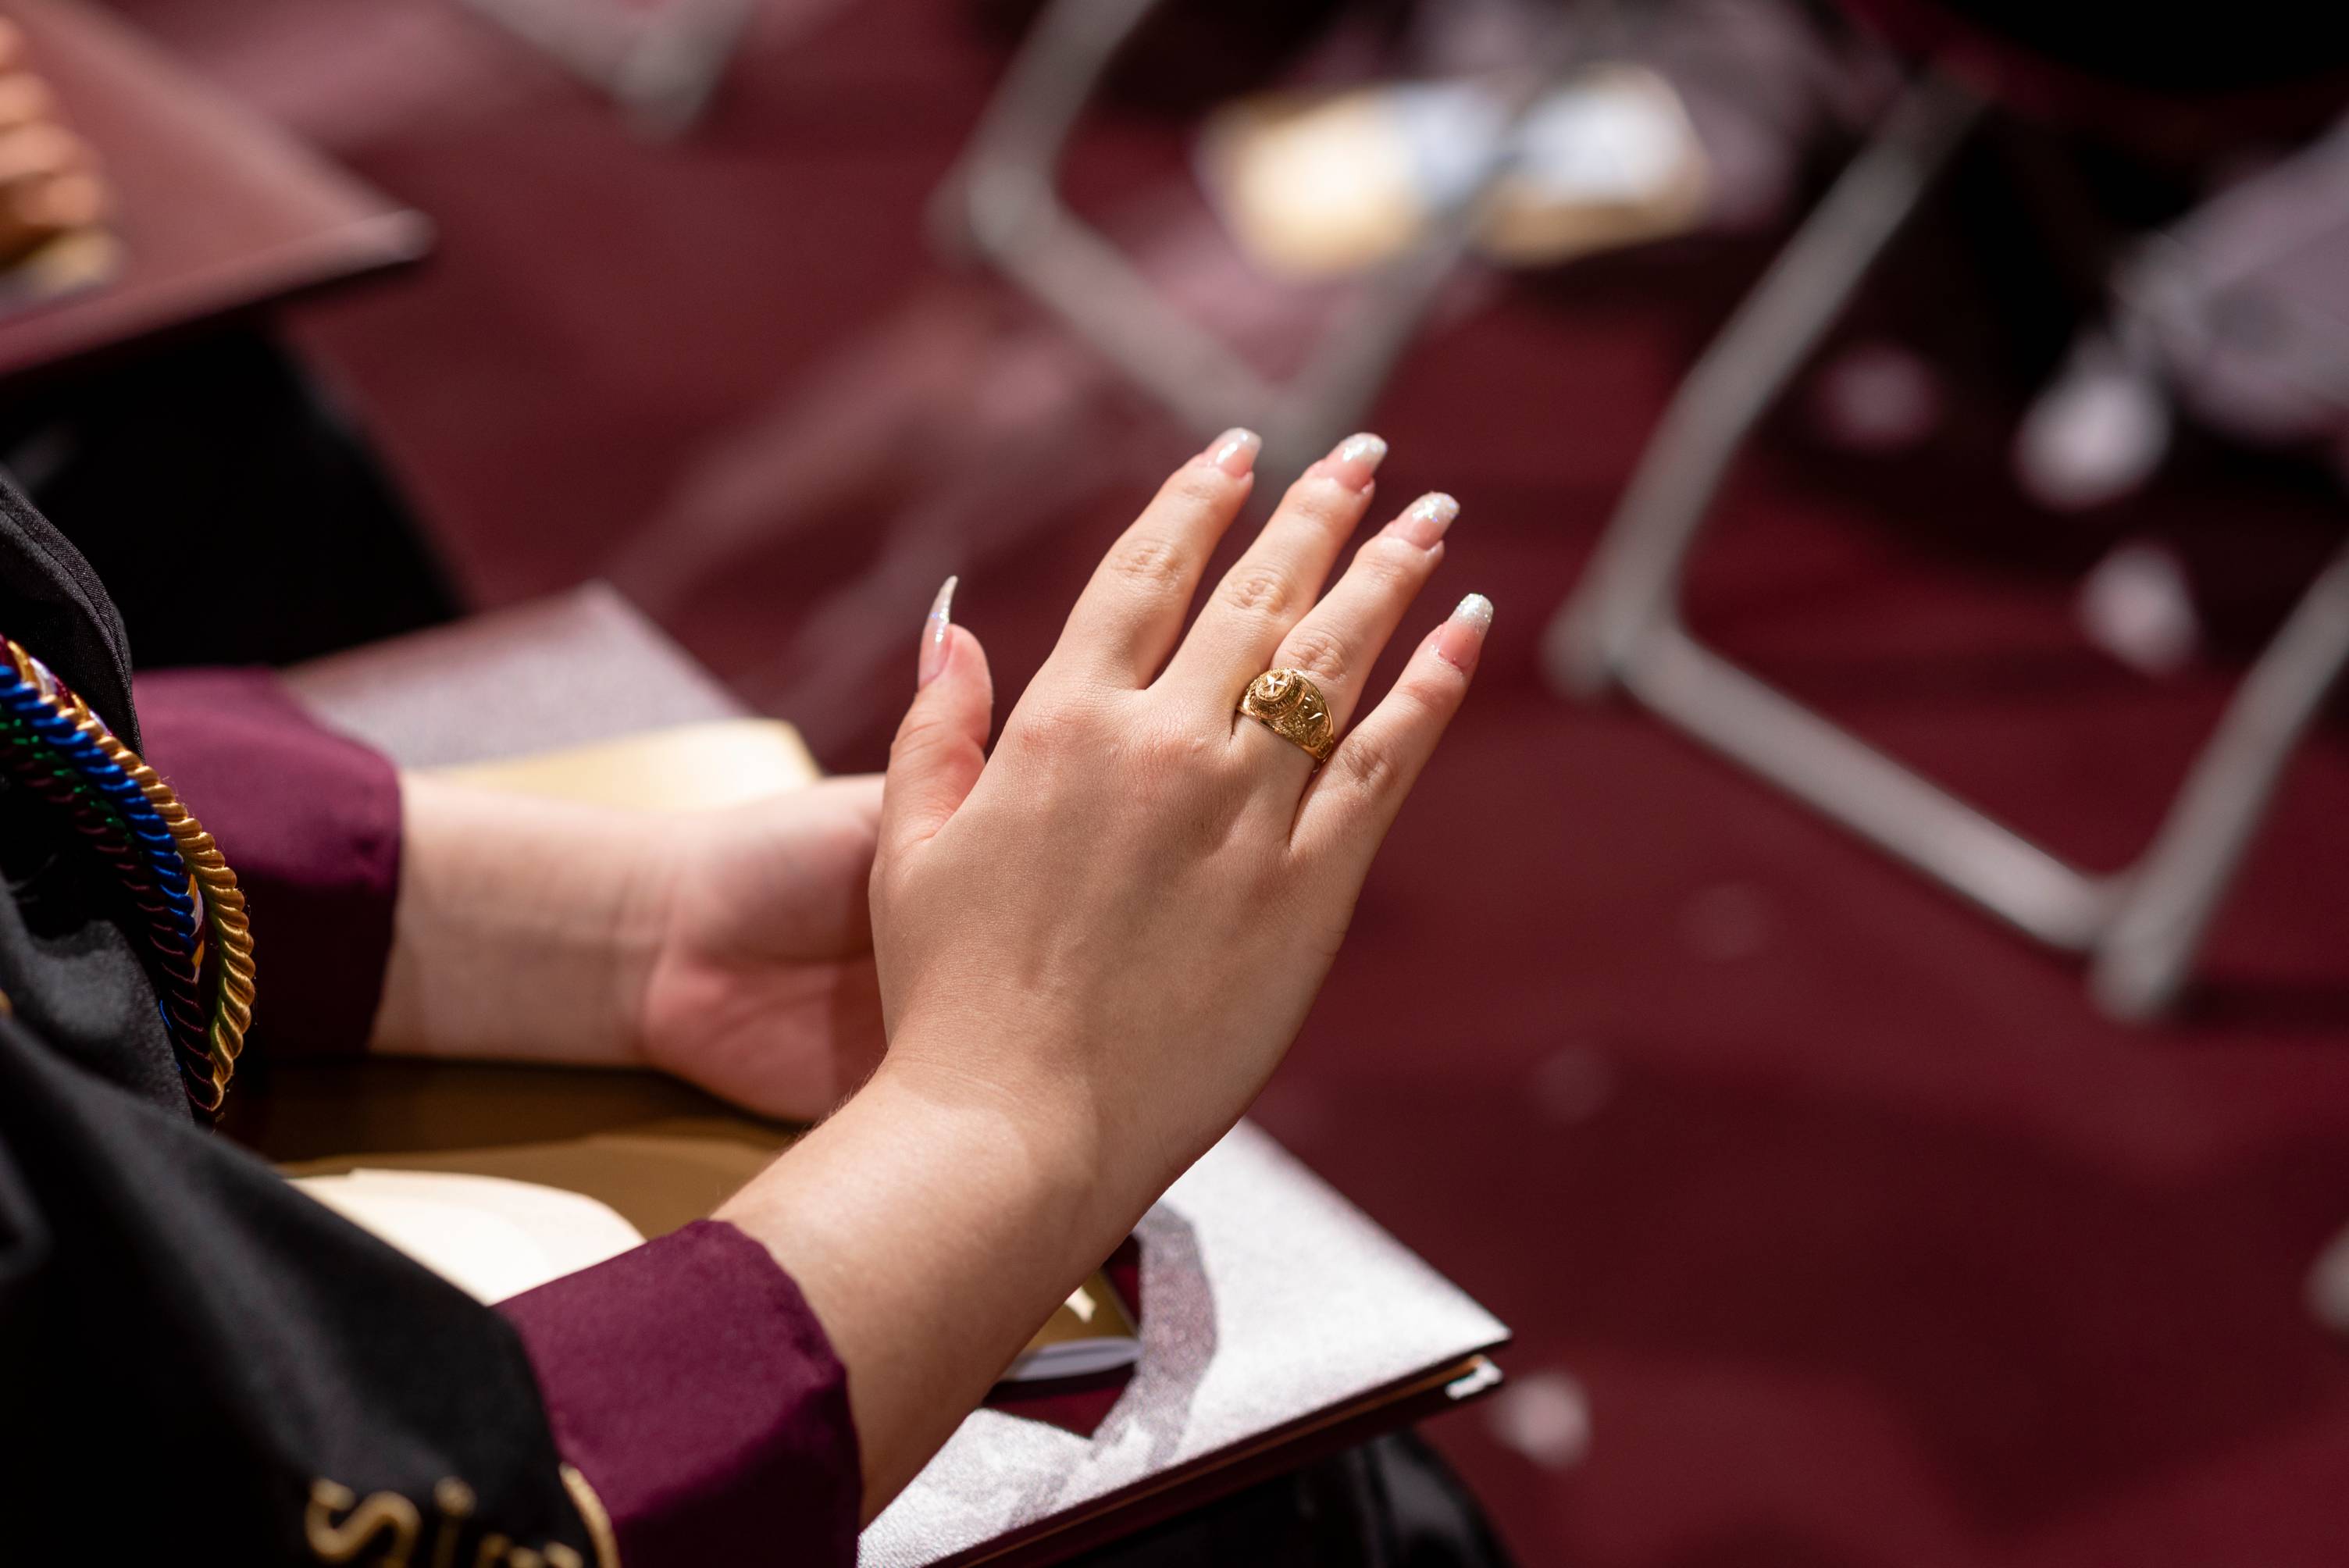 A grad looks at their TXST ring